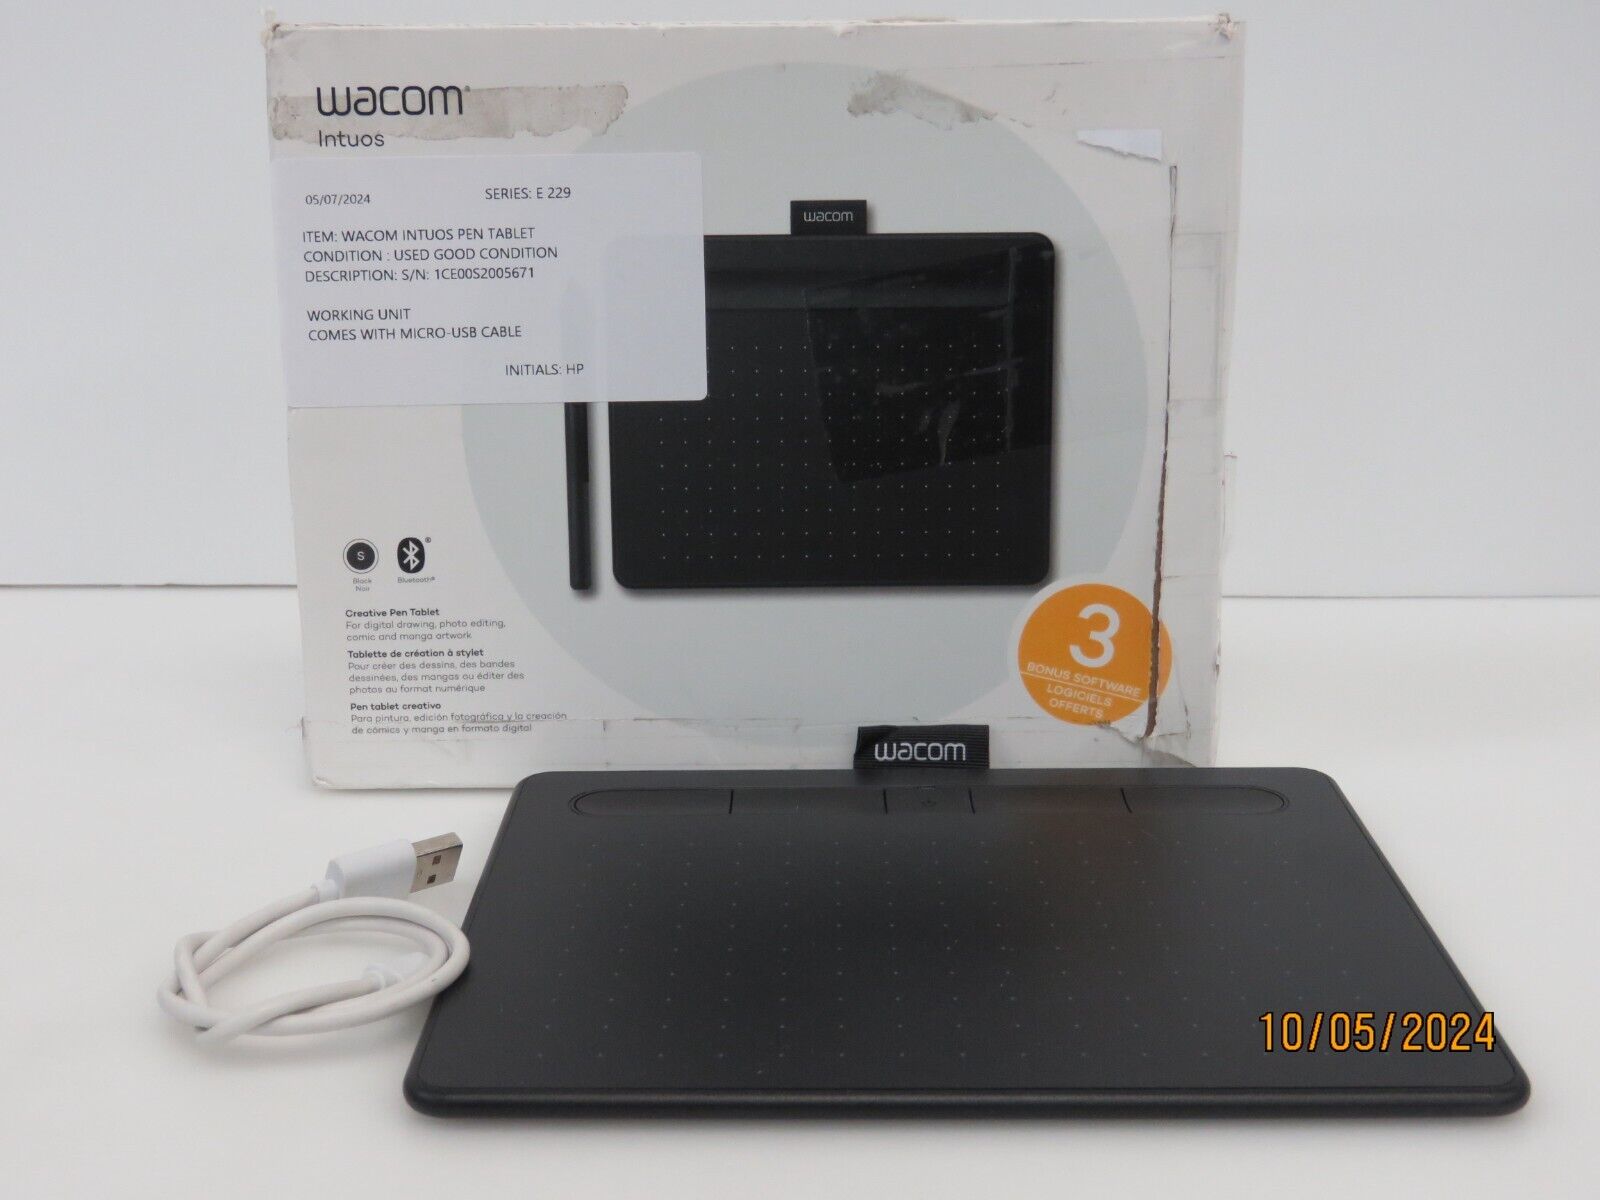 Wacom Intuos S Wireless Drawing Graphics Tablet - Black (MISSING STYLUS) [E229]